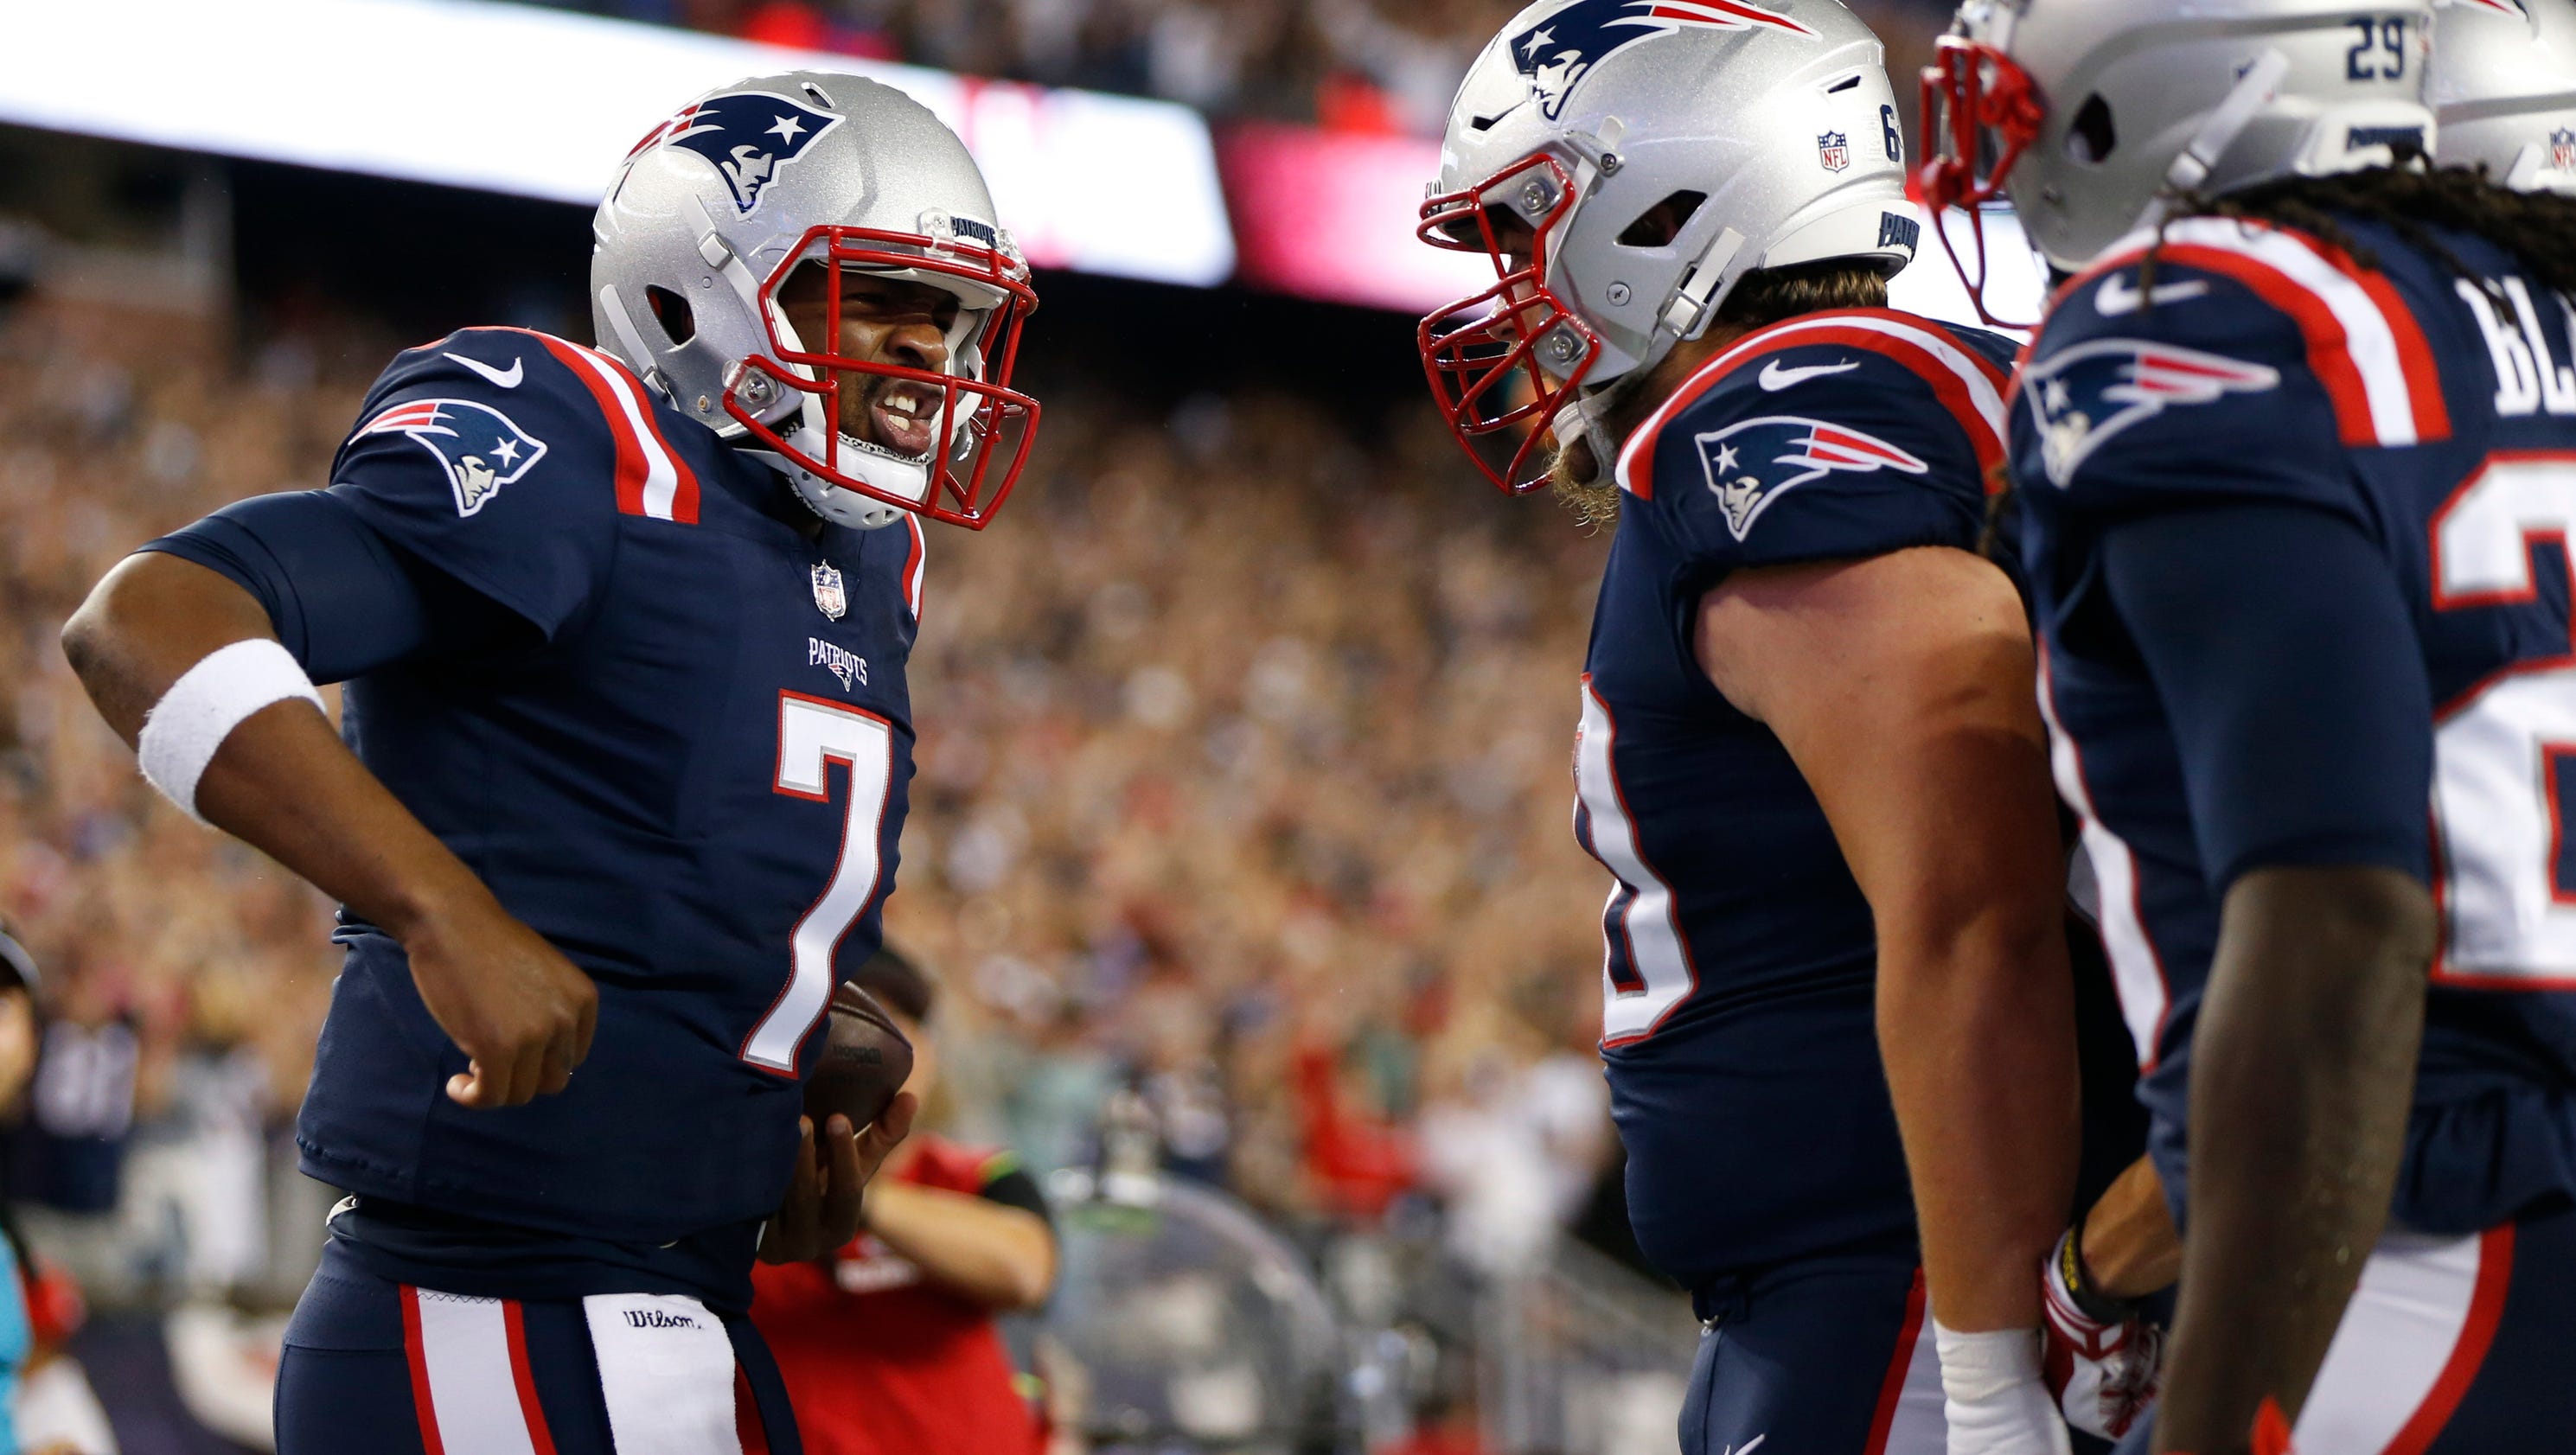 Jacoby Brissett wasn't perfect, but he delivered for Patriots in starting debut